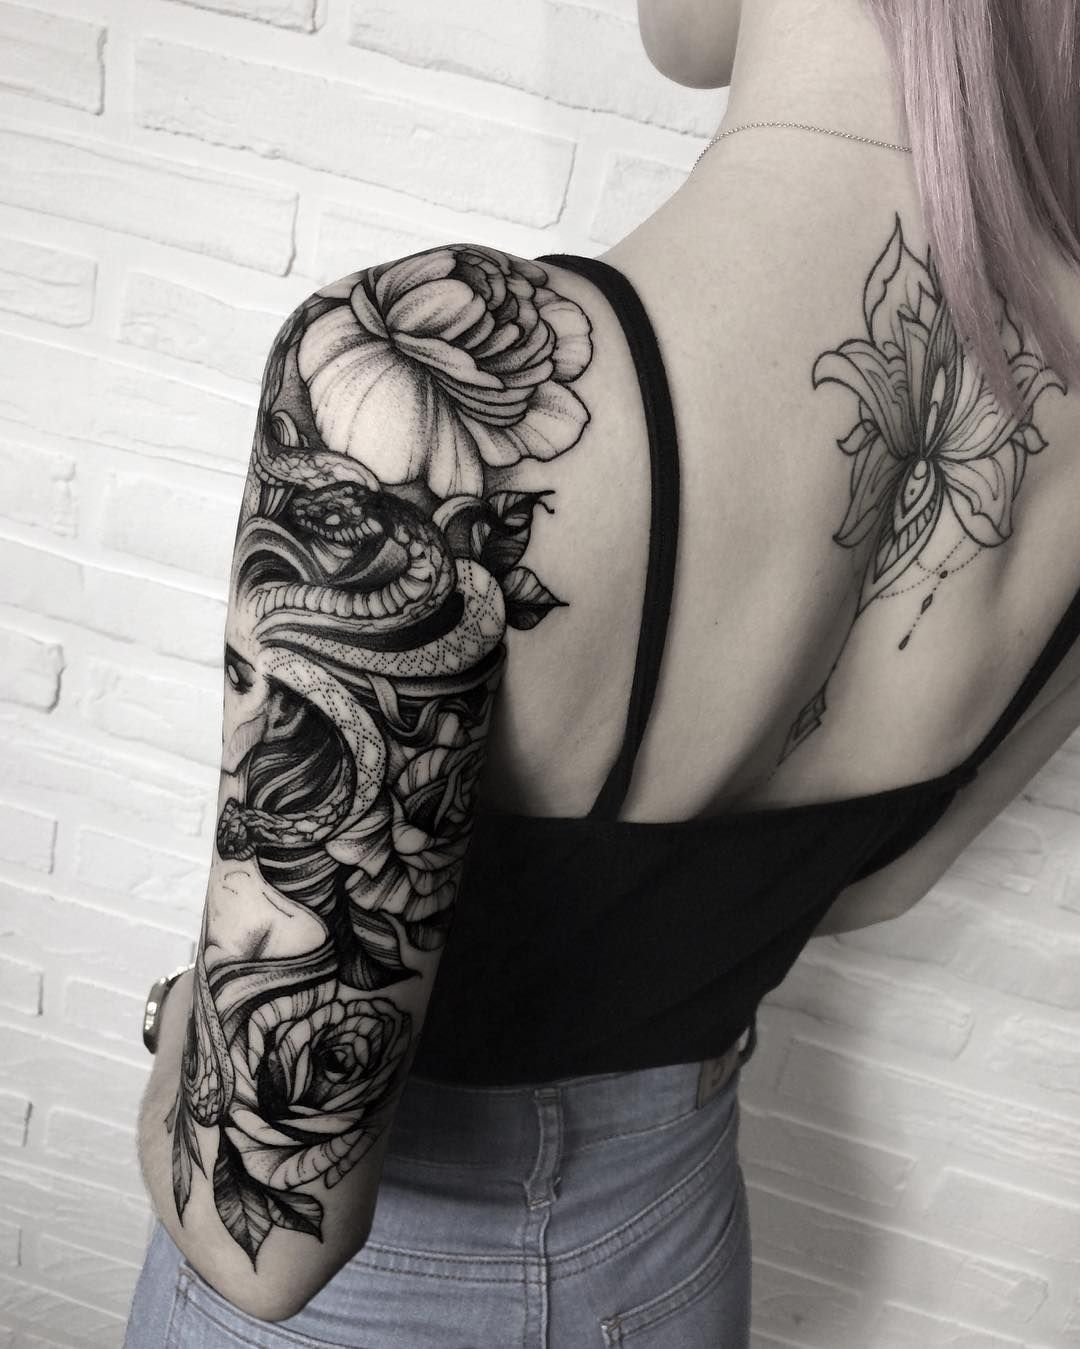 10 Unique Tattoo Sleeve Ideas For Women in dimensions 1080 X 1349